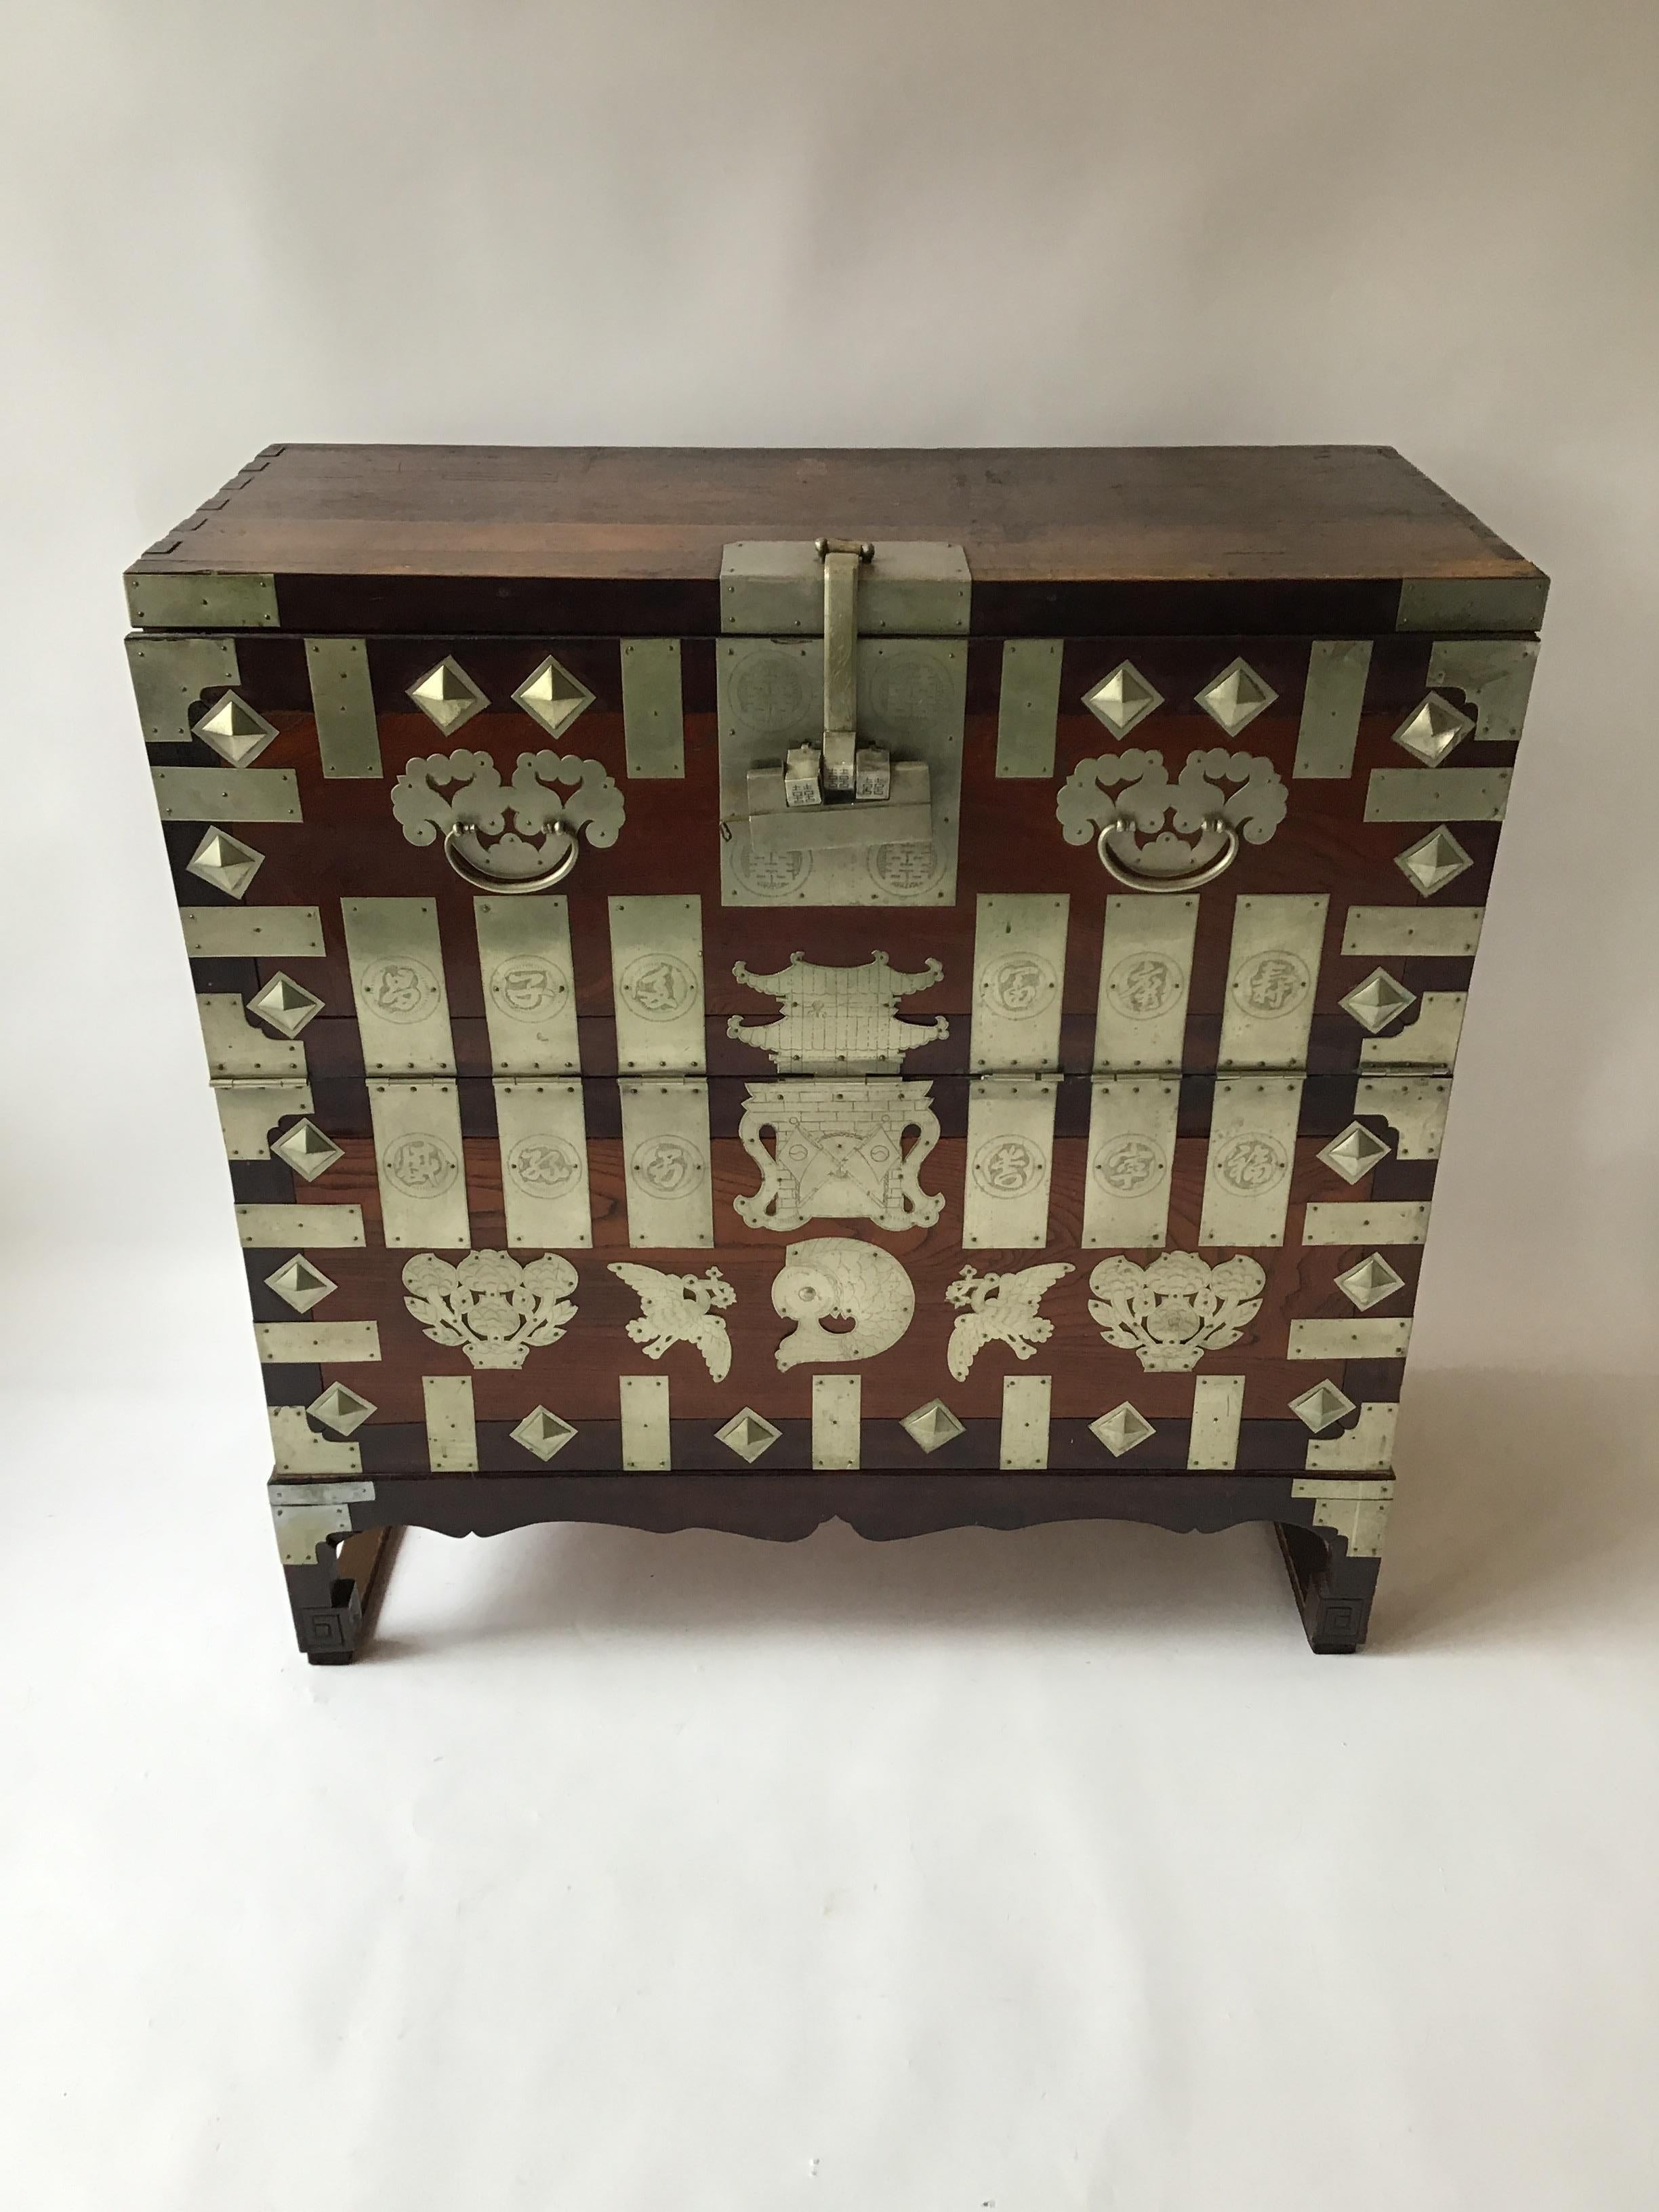 1860s Korean chest, adorned with fish, birds and flowers. 2 shelves.